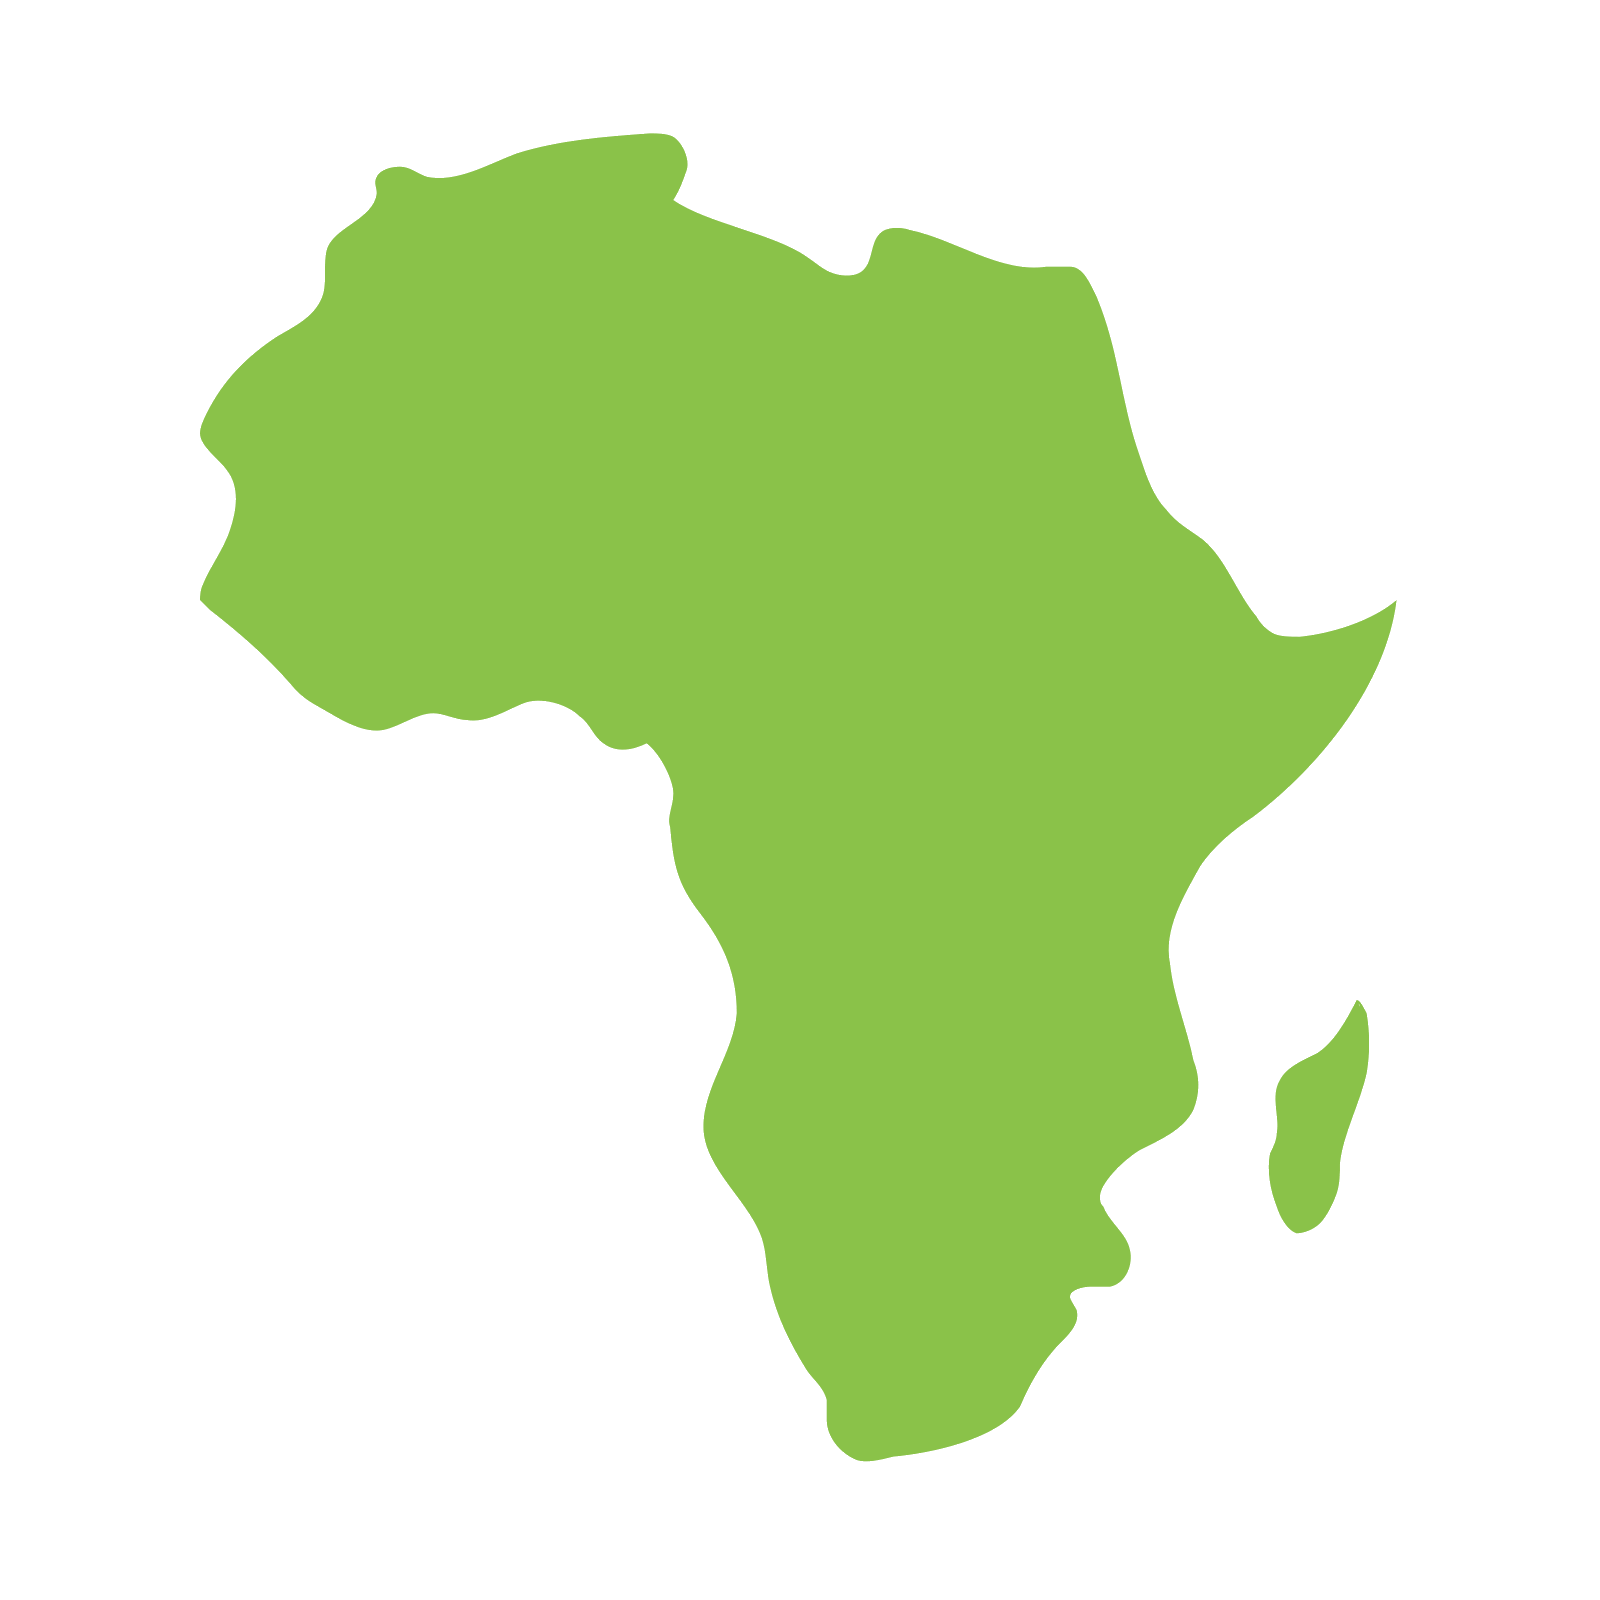 Illustration of an isolated Africa continent map icon with the 